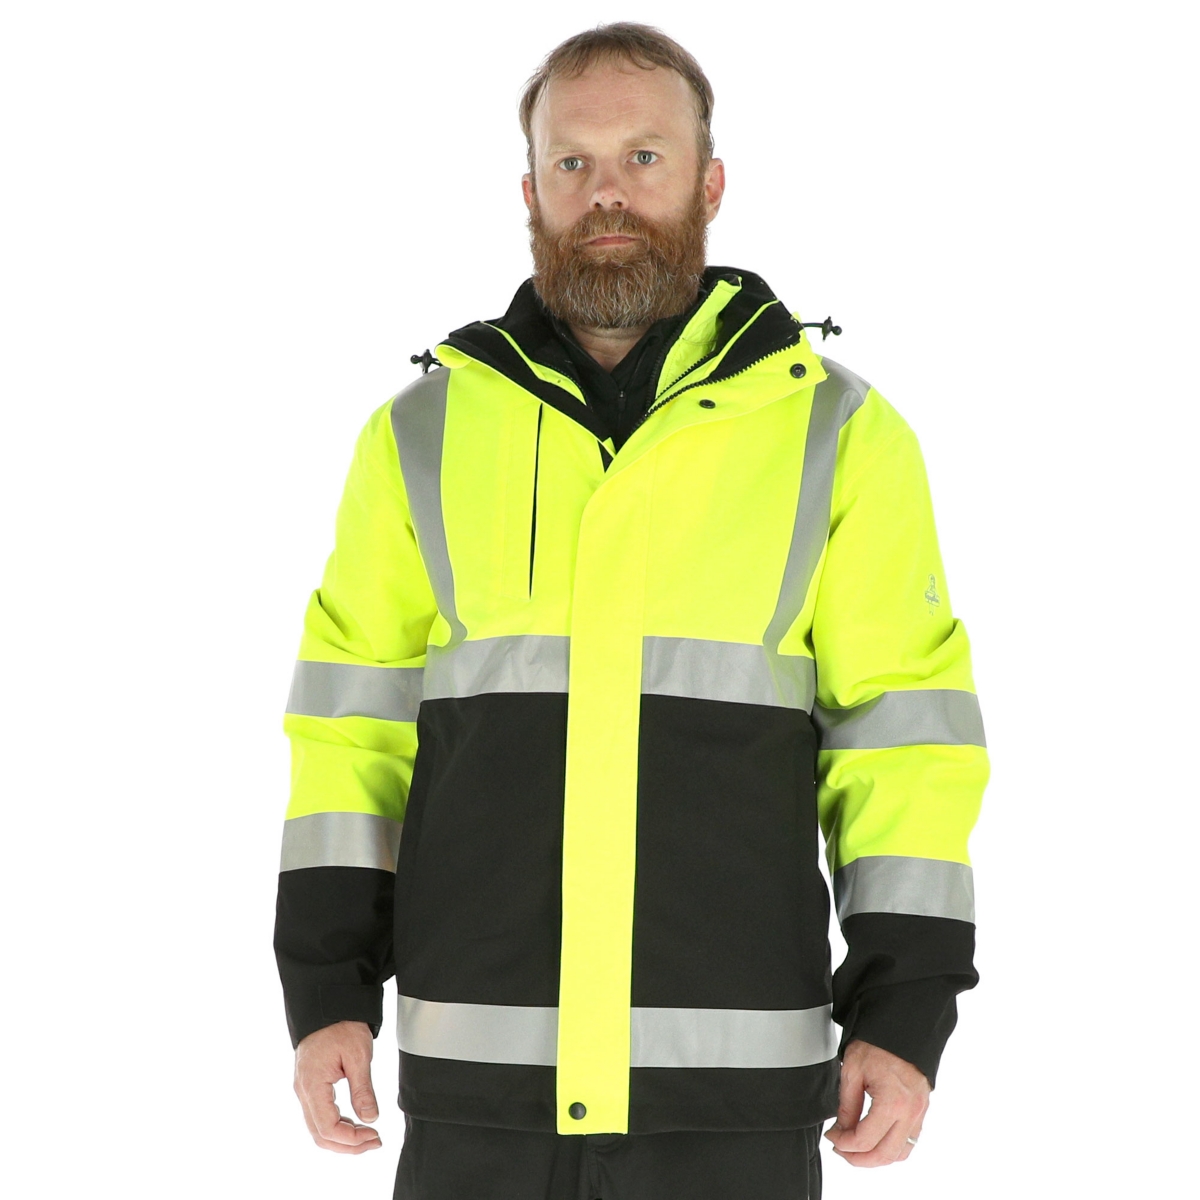 Big & Tall HiVis 3-in-1 Insulated Rainwear Systems Jacket - Ansi Class 2 - Lime